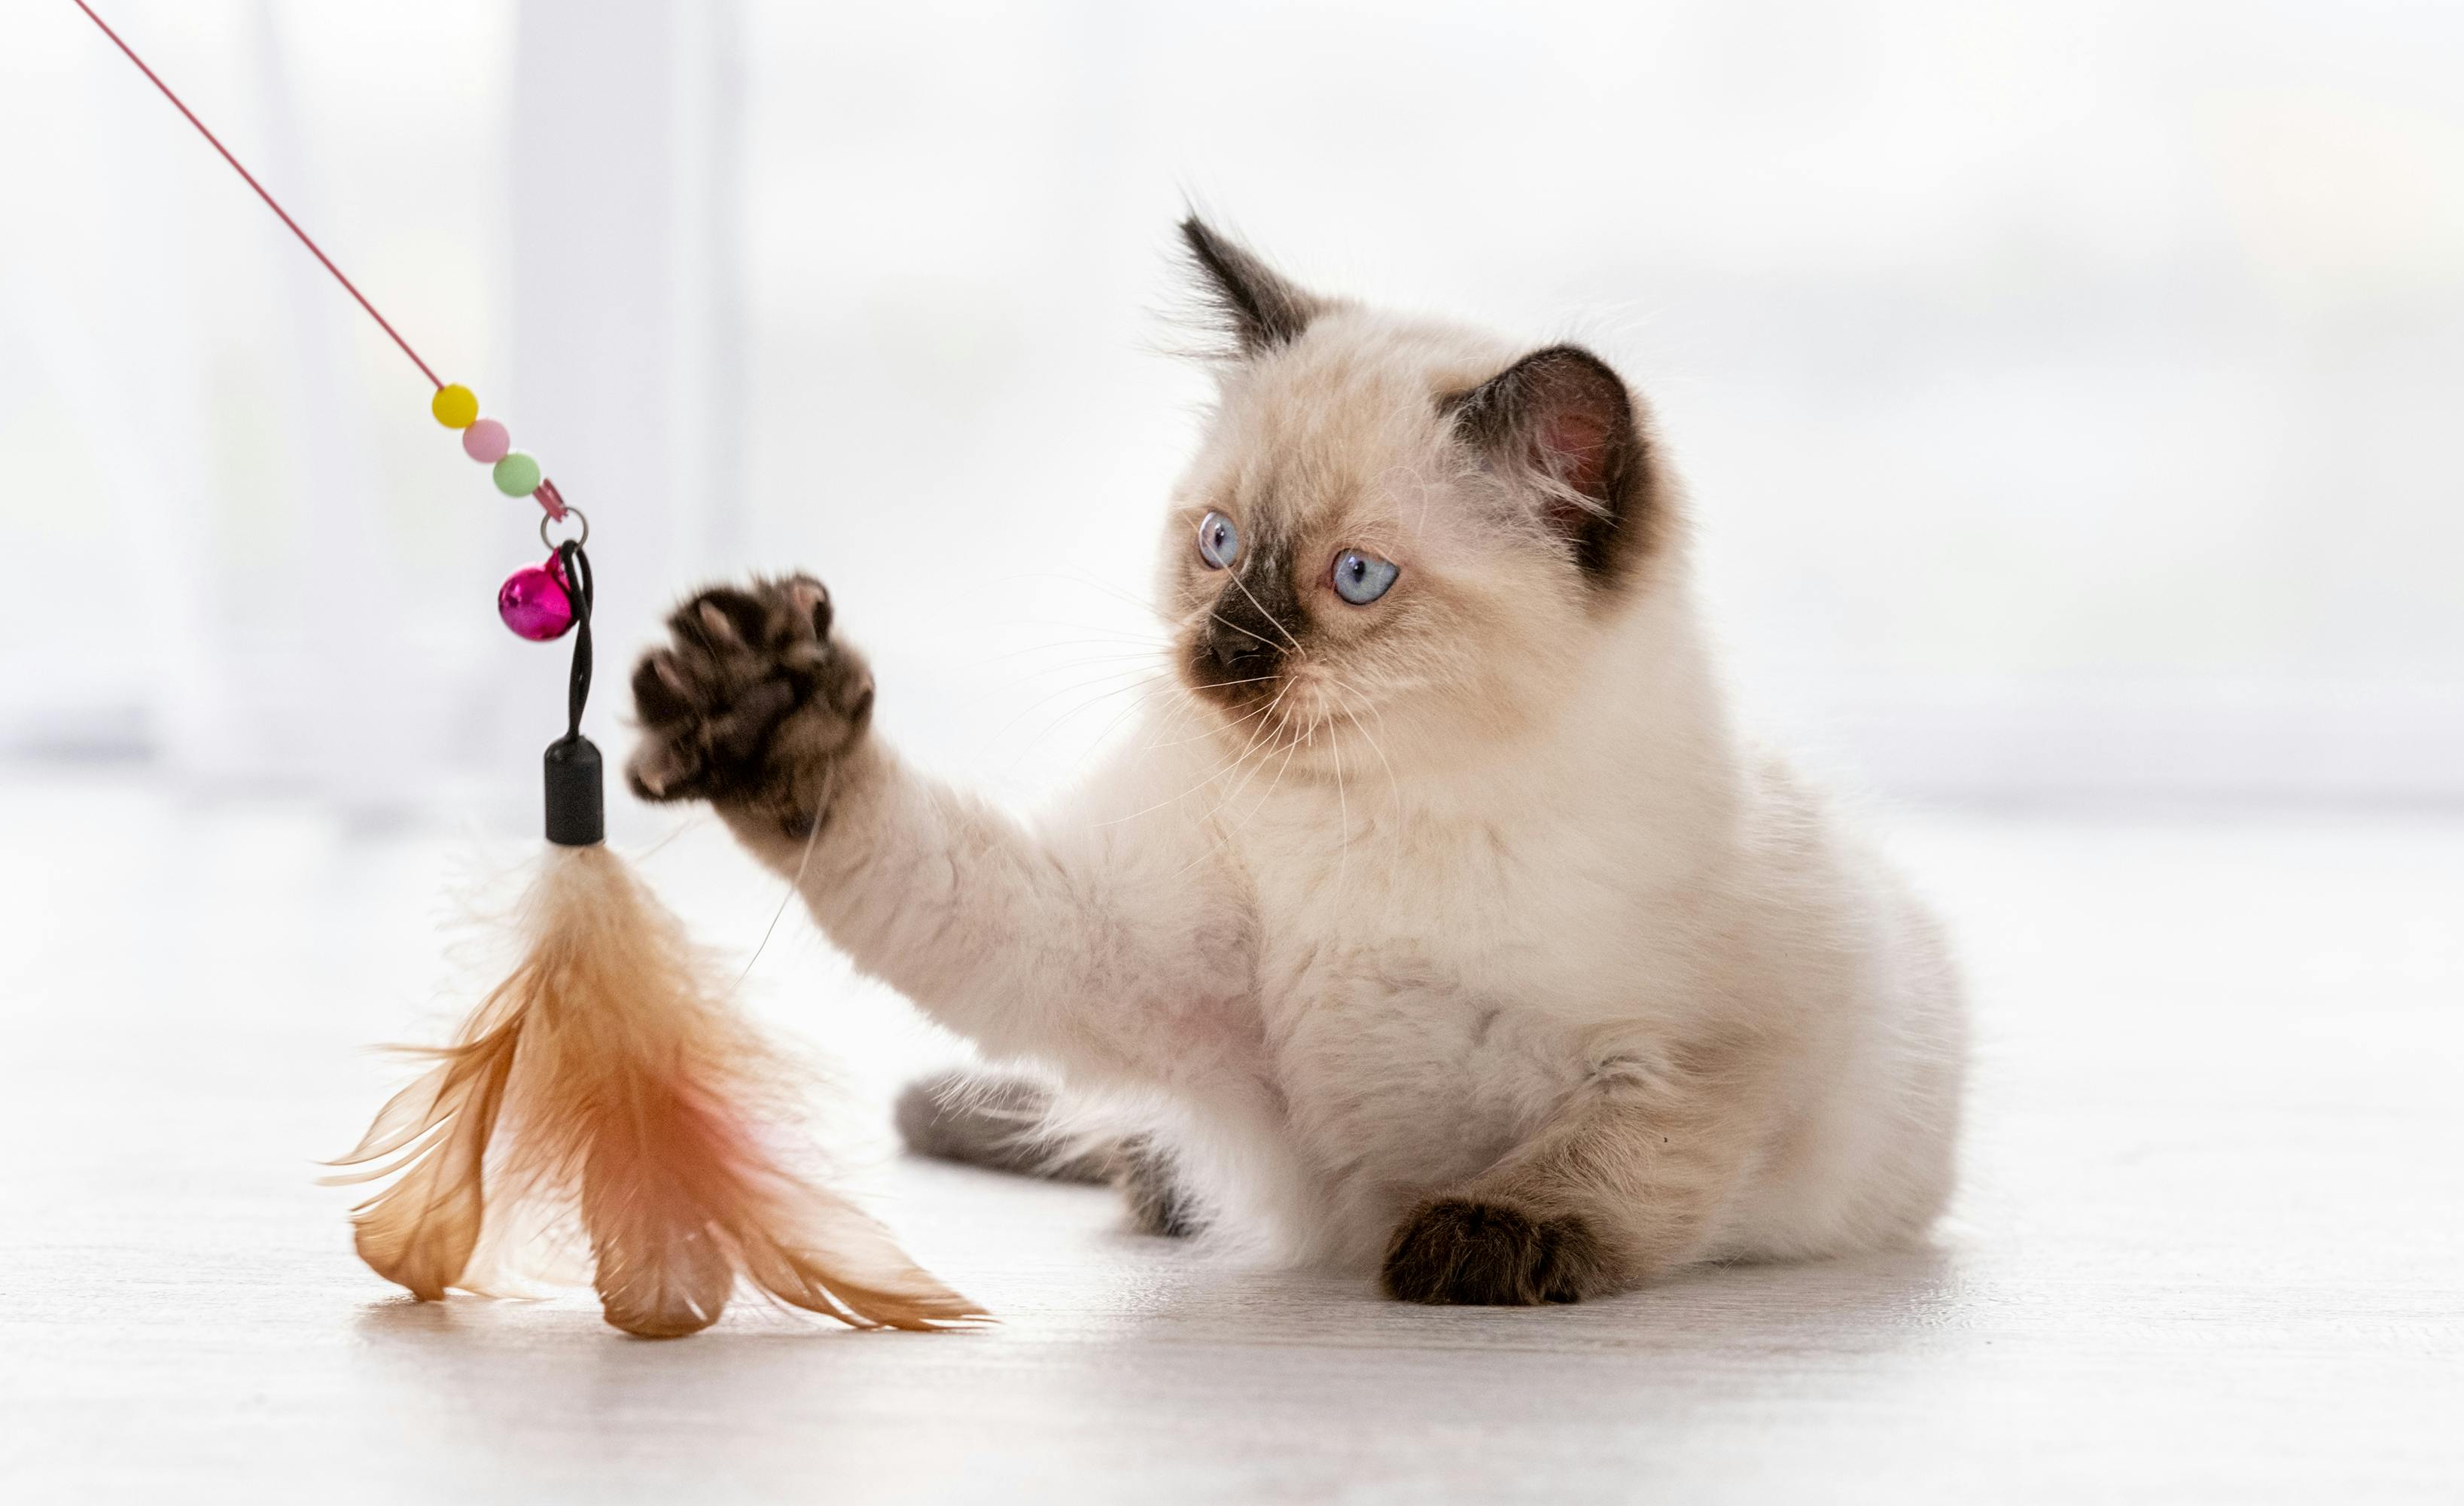 Kitten playing with a feather toy.